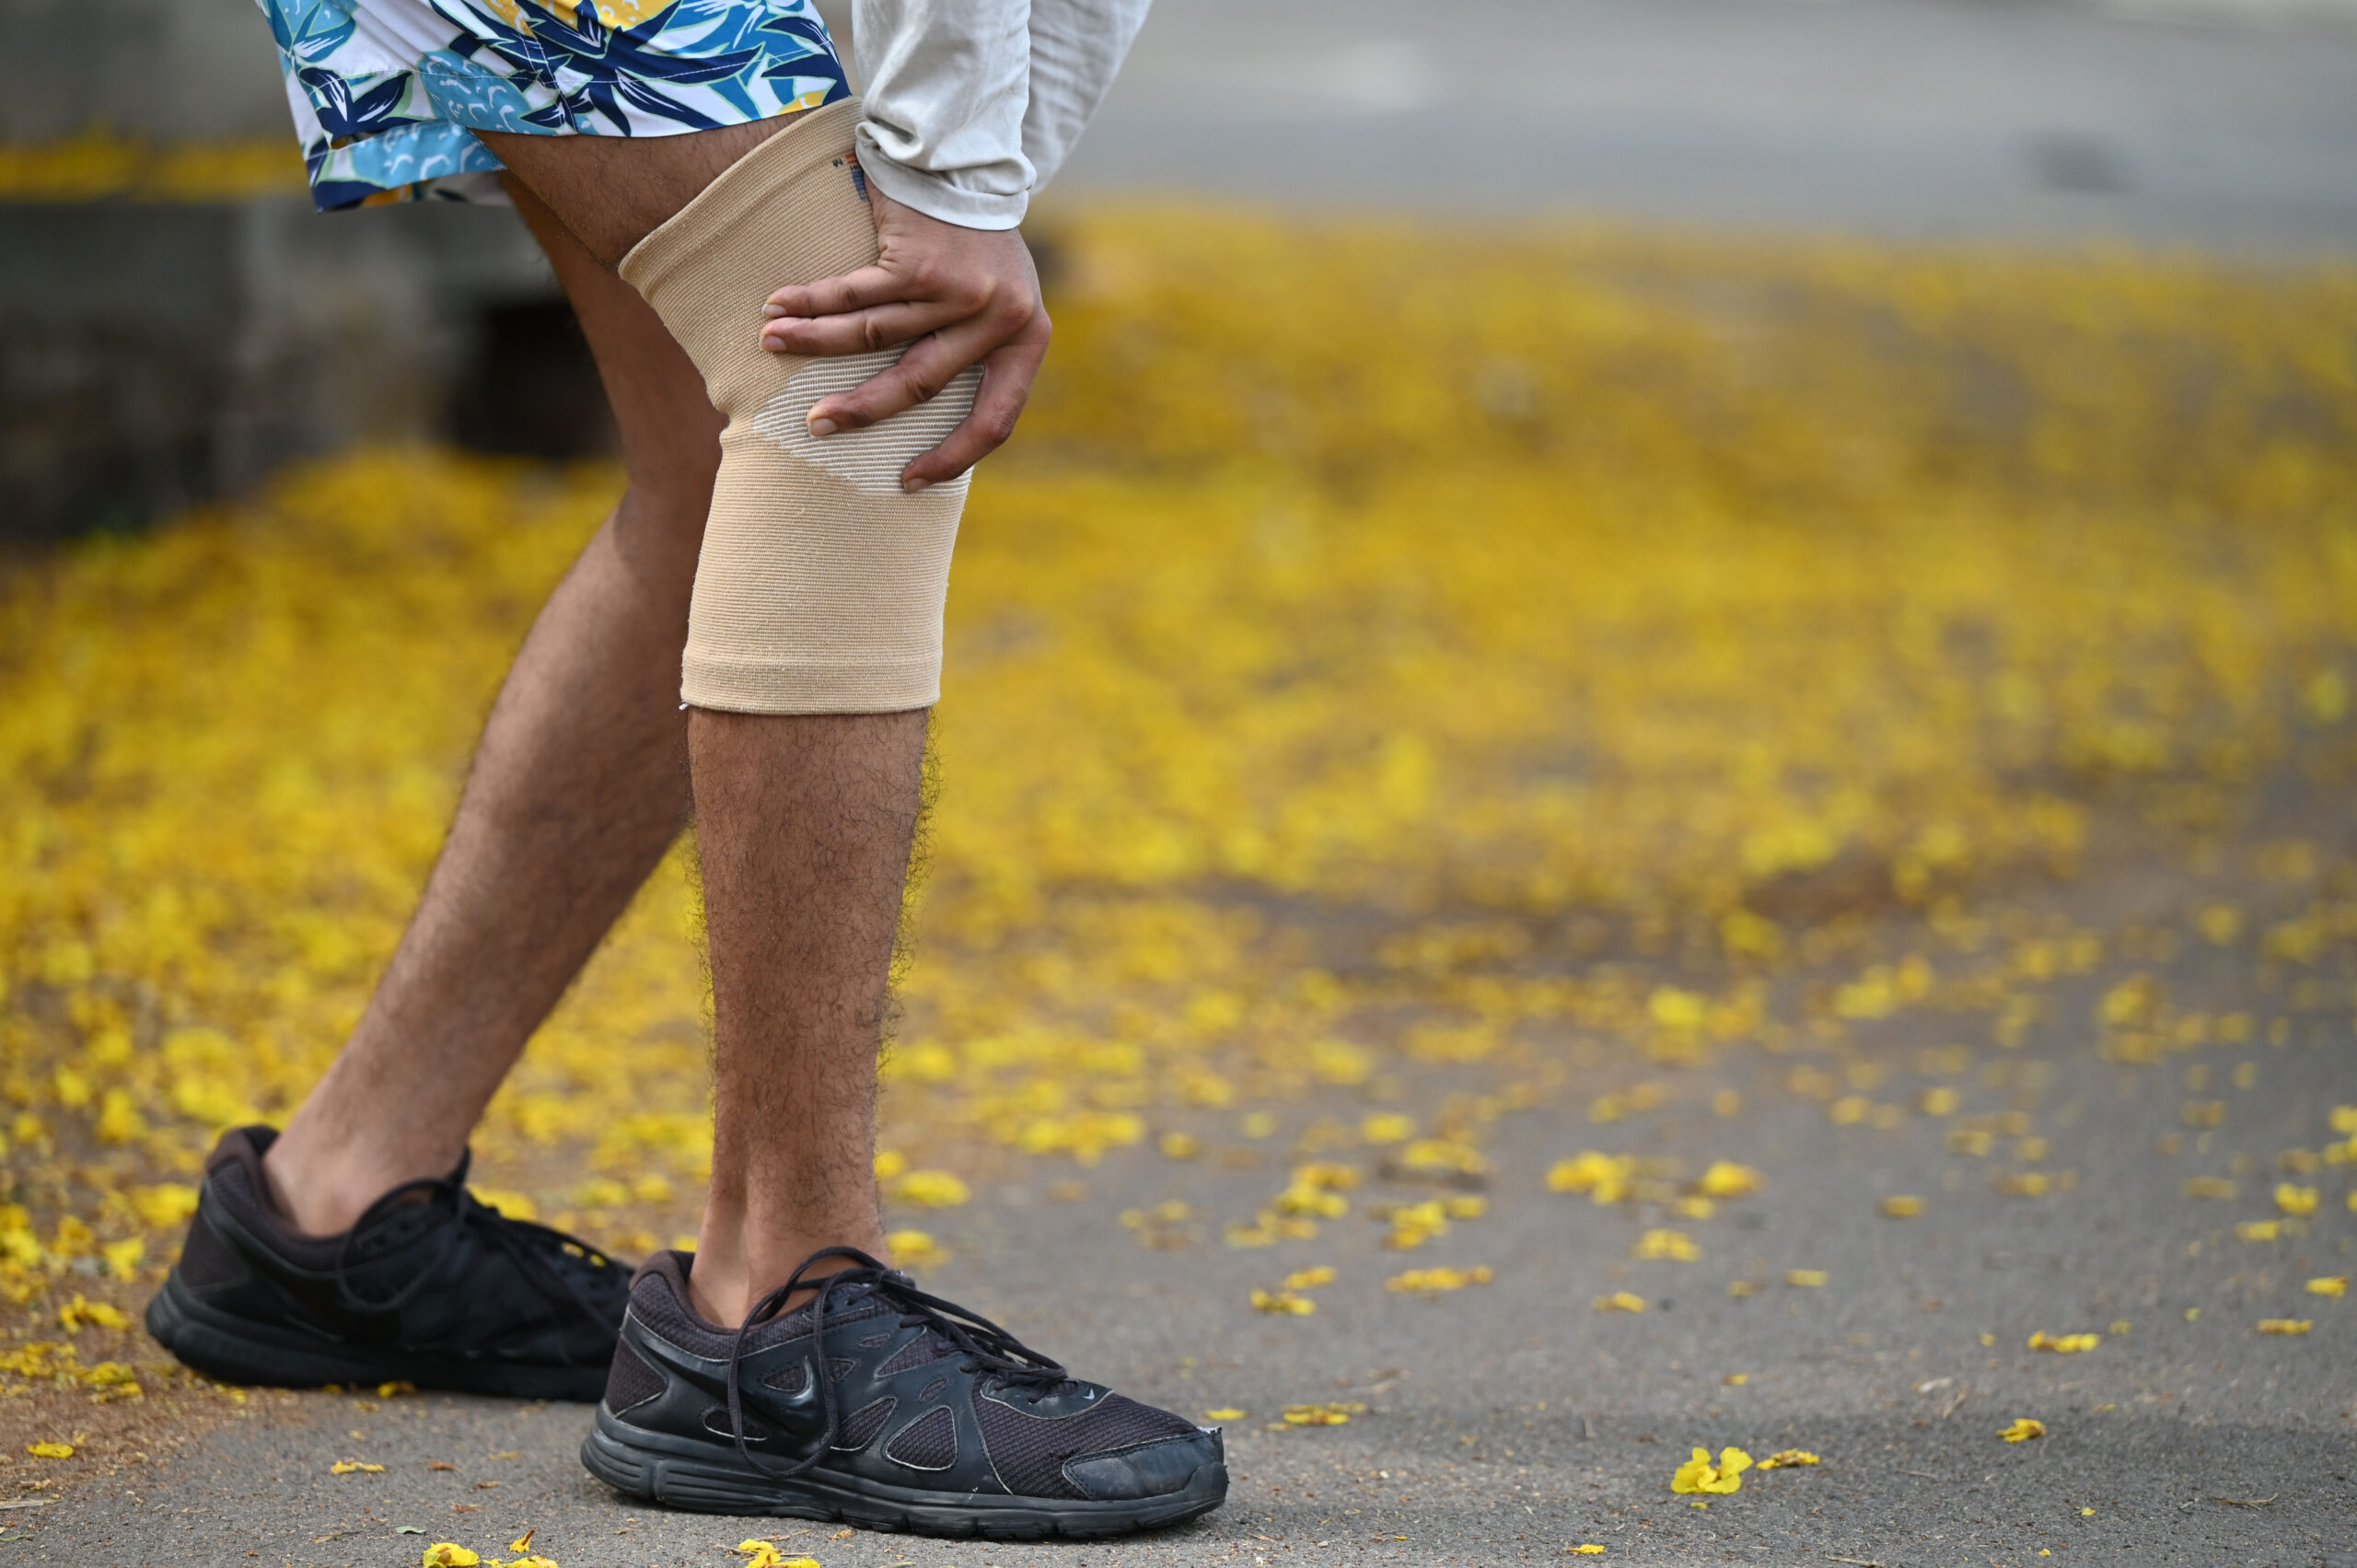 What causes knee pain?